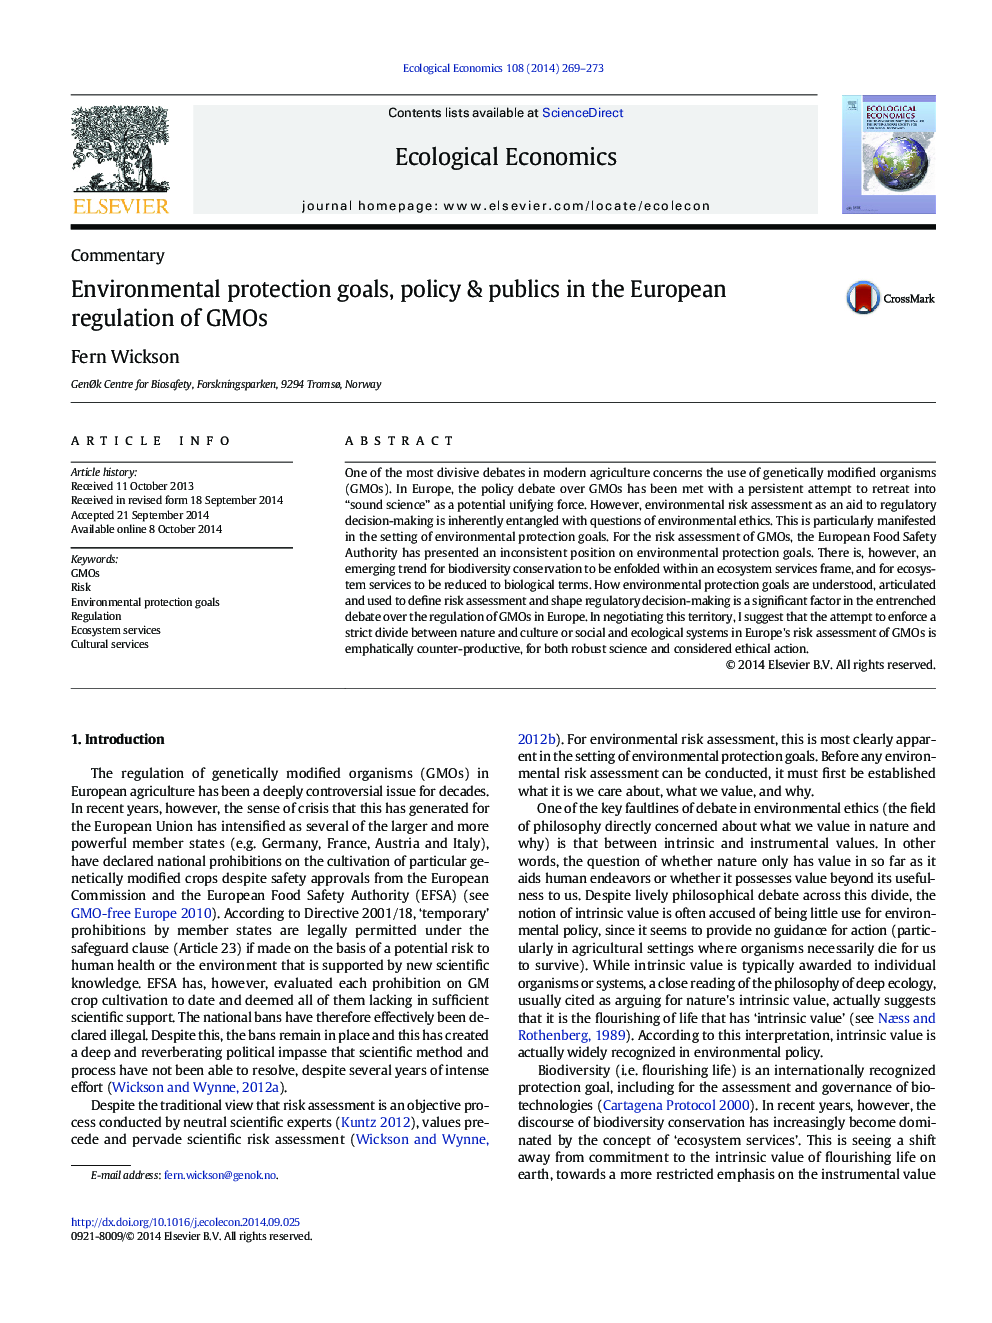 Environmental protection goals, policy & publics in the European regulation of GMOs